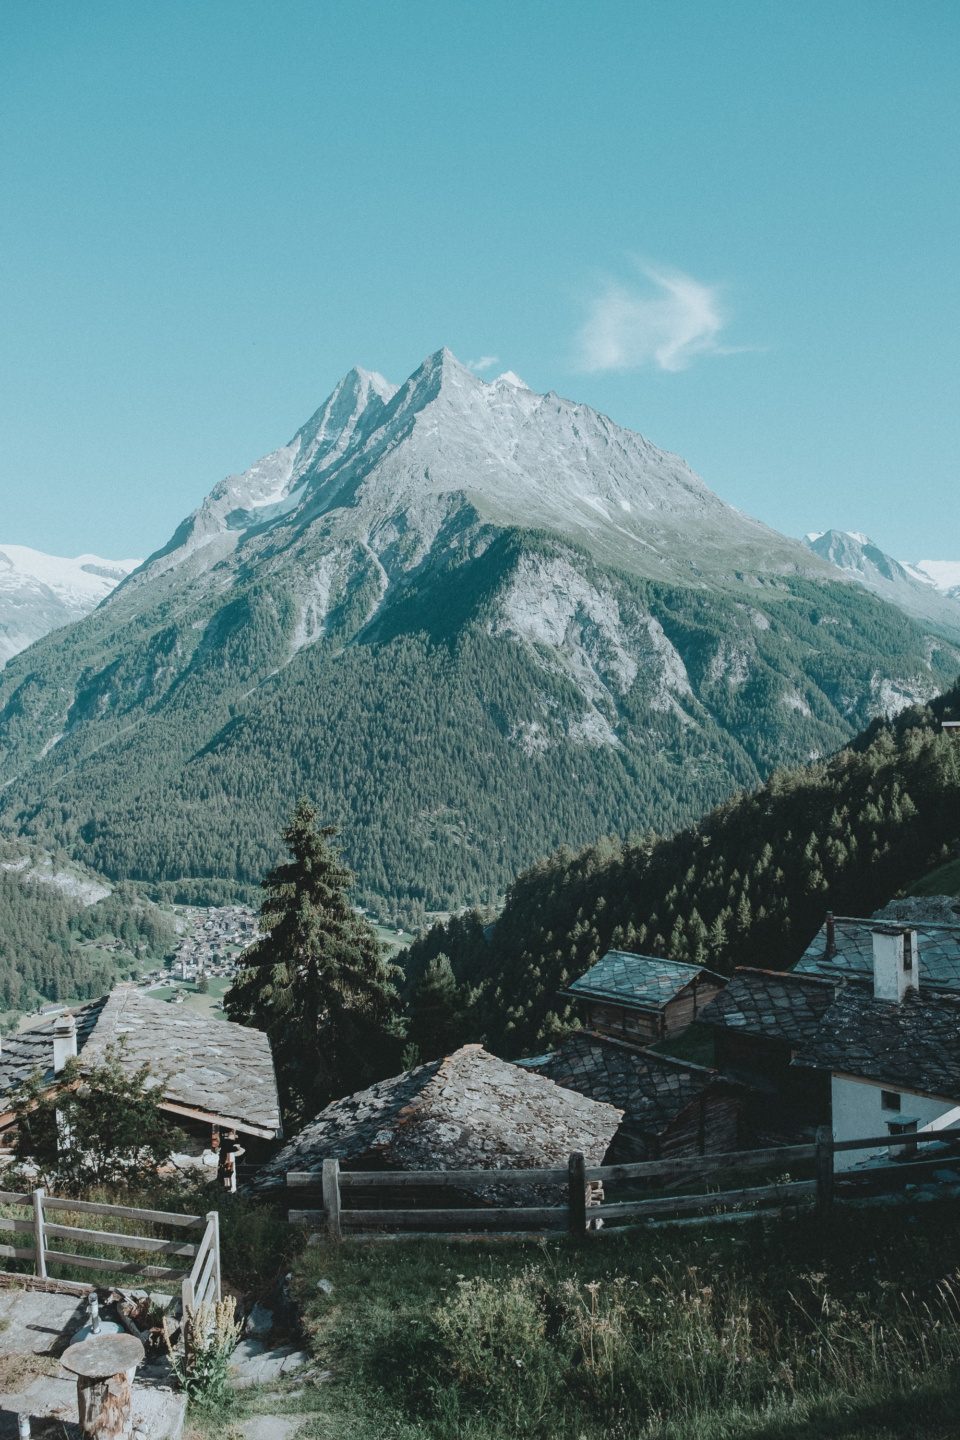 Mountain peaks and chalets in Val d'Hérens in Valais, Switzerla